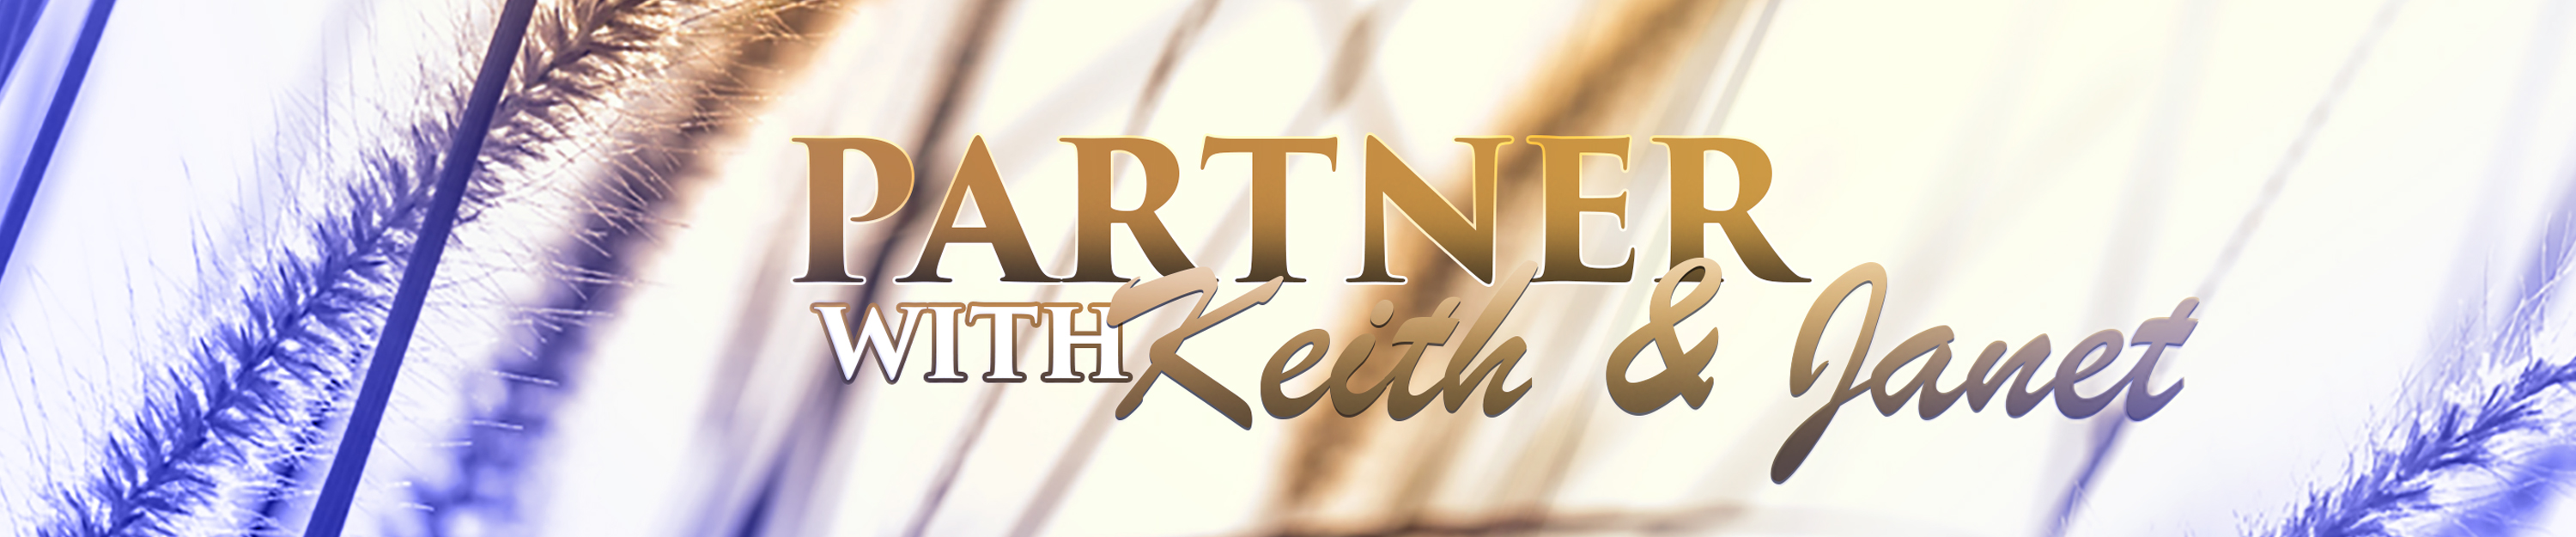 Partner with Keith Miller